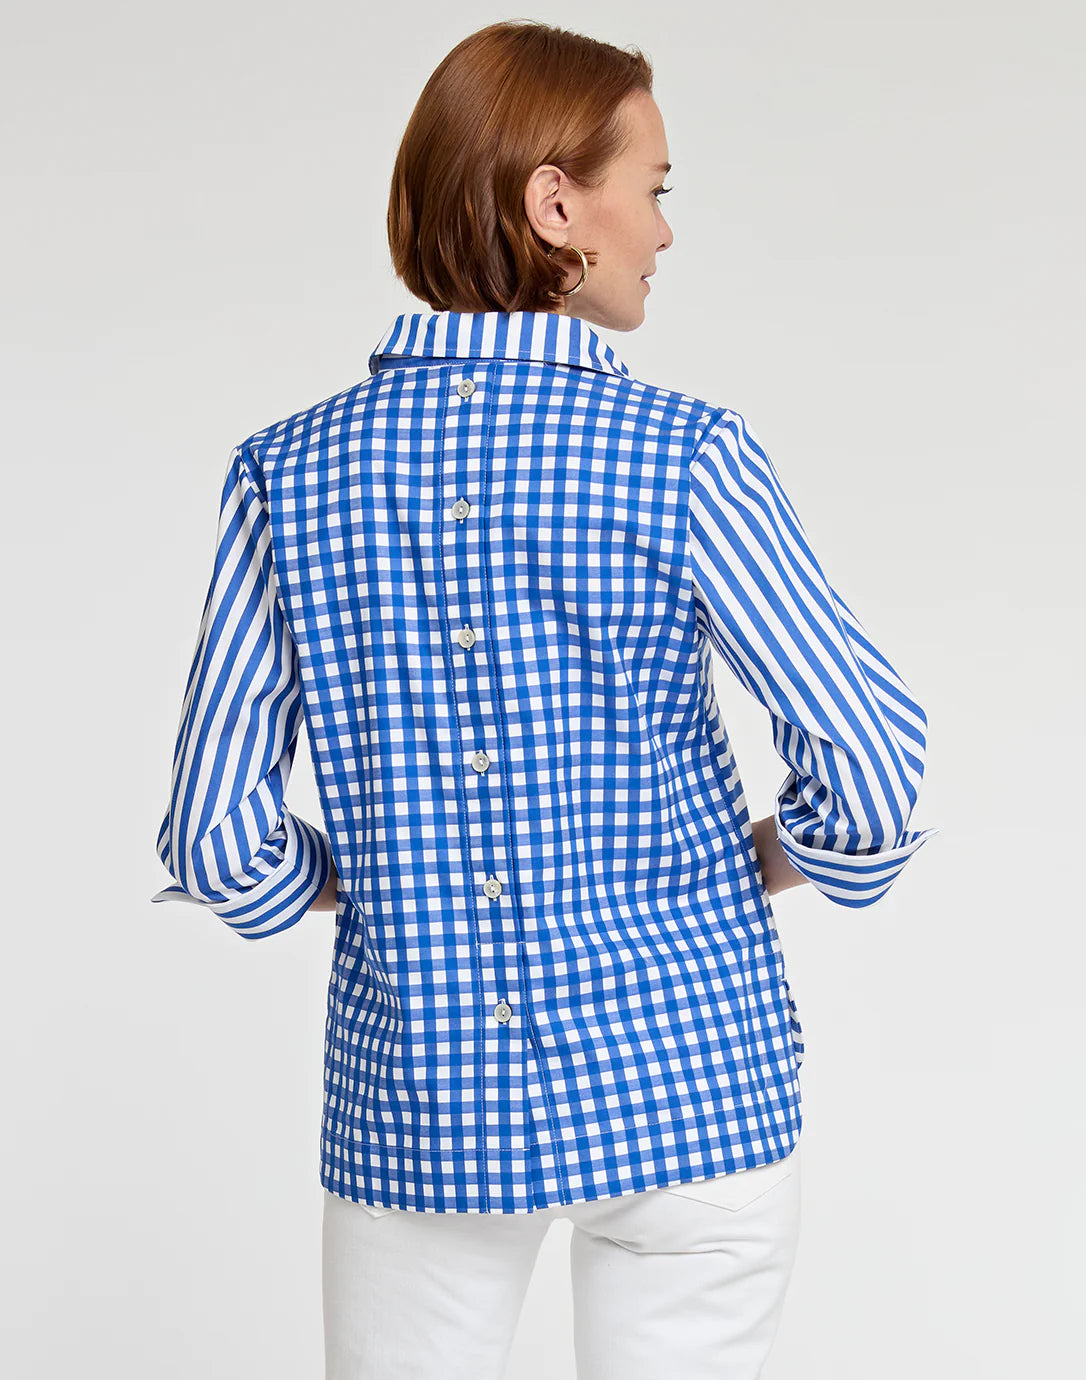 Aileen 3/4 Sleeve Top in Electric Blue/White